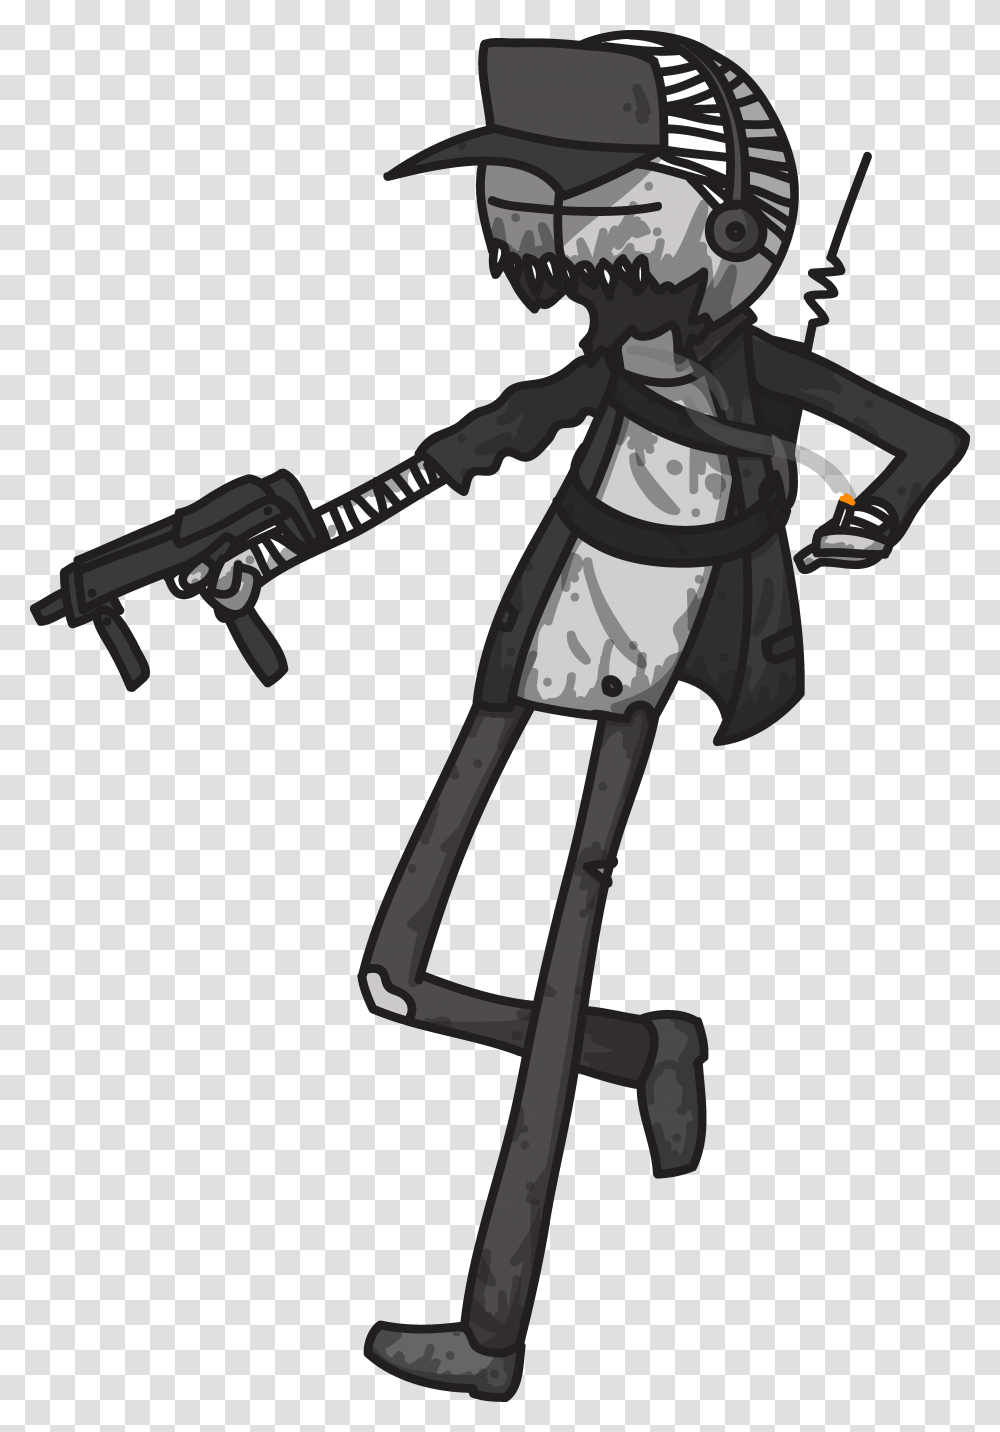 Dumb Idiot Assault Rifle, Pirate, Weapon, Weaponry, Cross Transparent Png